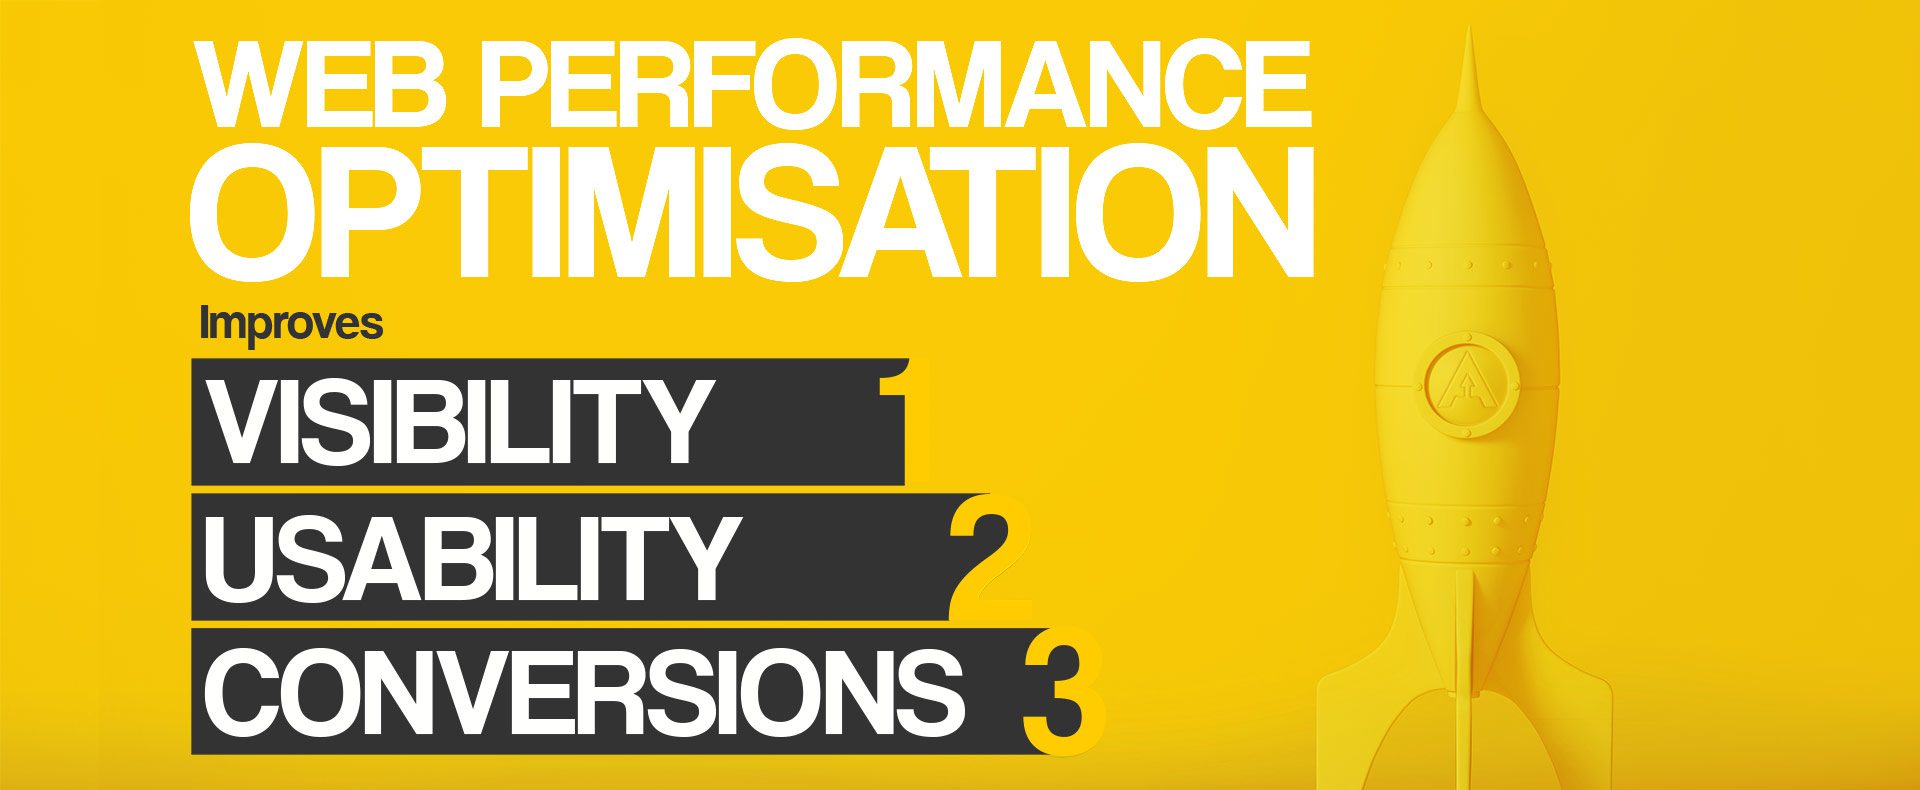 Website Performance Optimisation Services to Boost Your Business Website